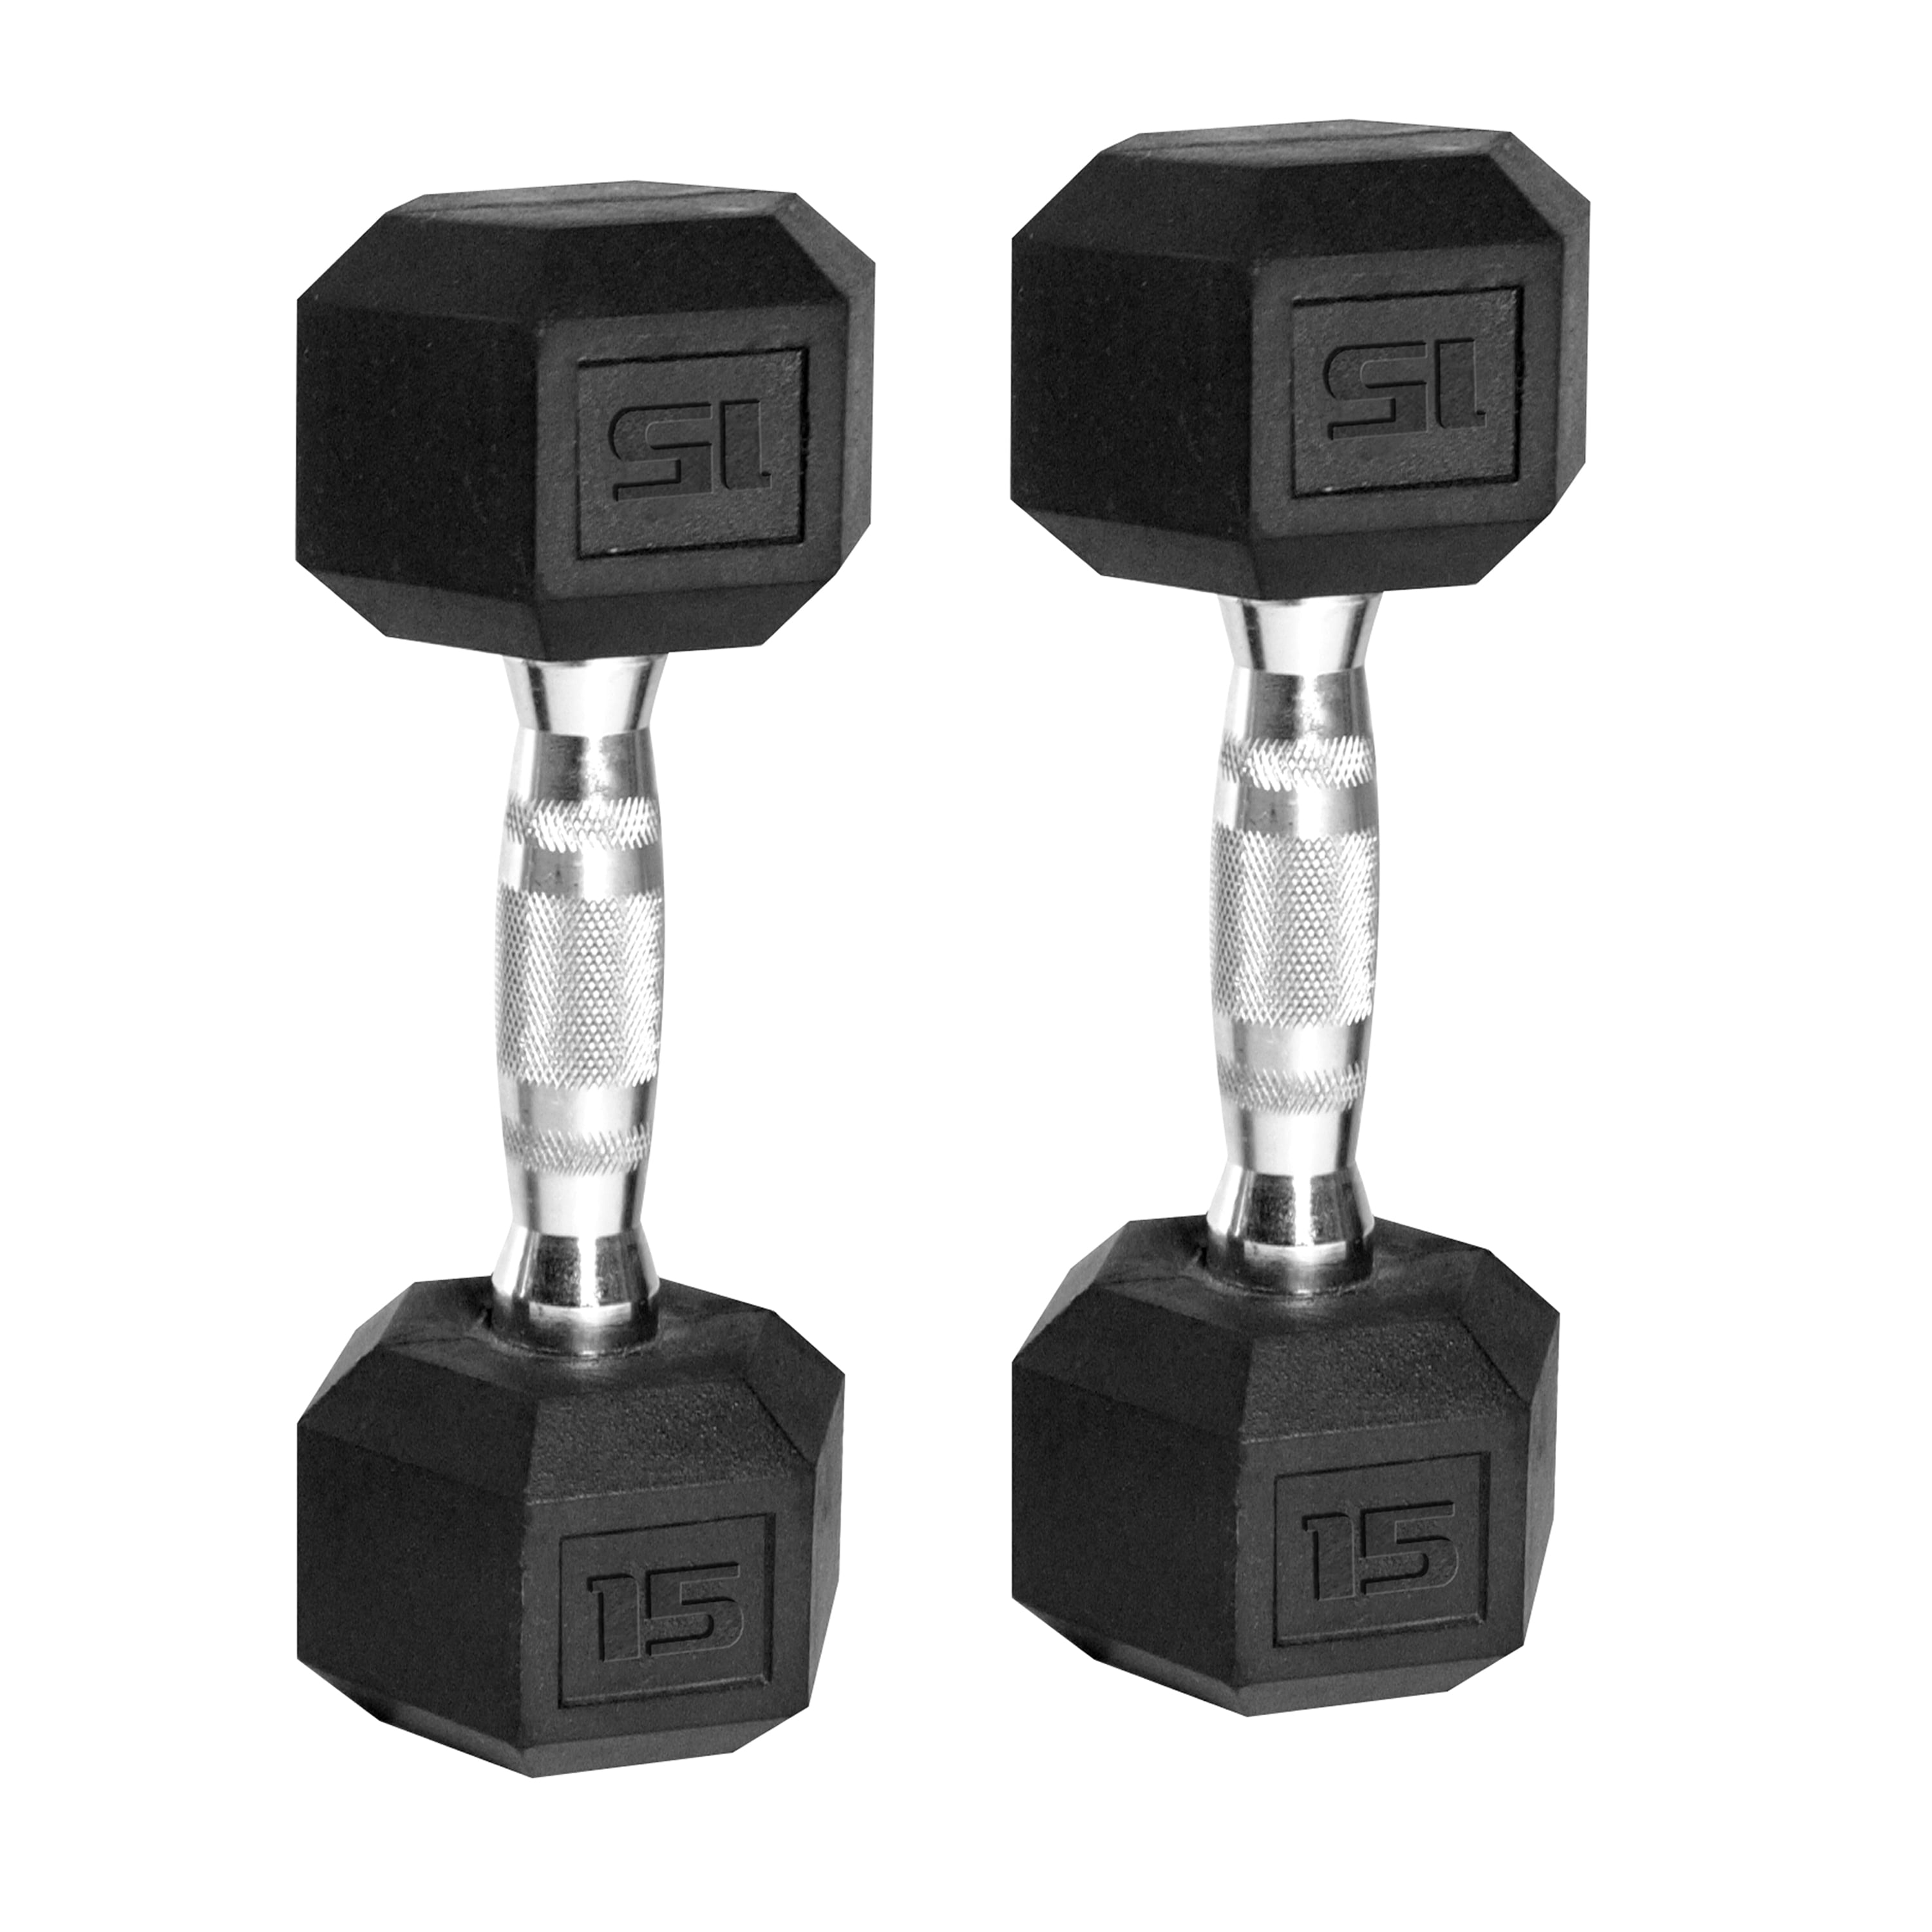 2PC 50 LBS Barbell Cast Iron Hex Dumbbell Barbell Set of 2 Hex Rubber Dumbbell with Metal Handles Pair of 2 Heavy Dumbbells Choose Weigh 